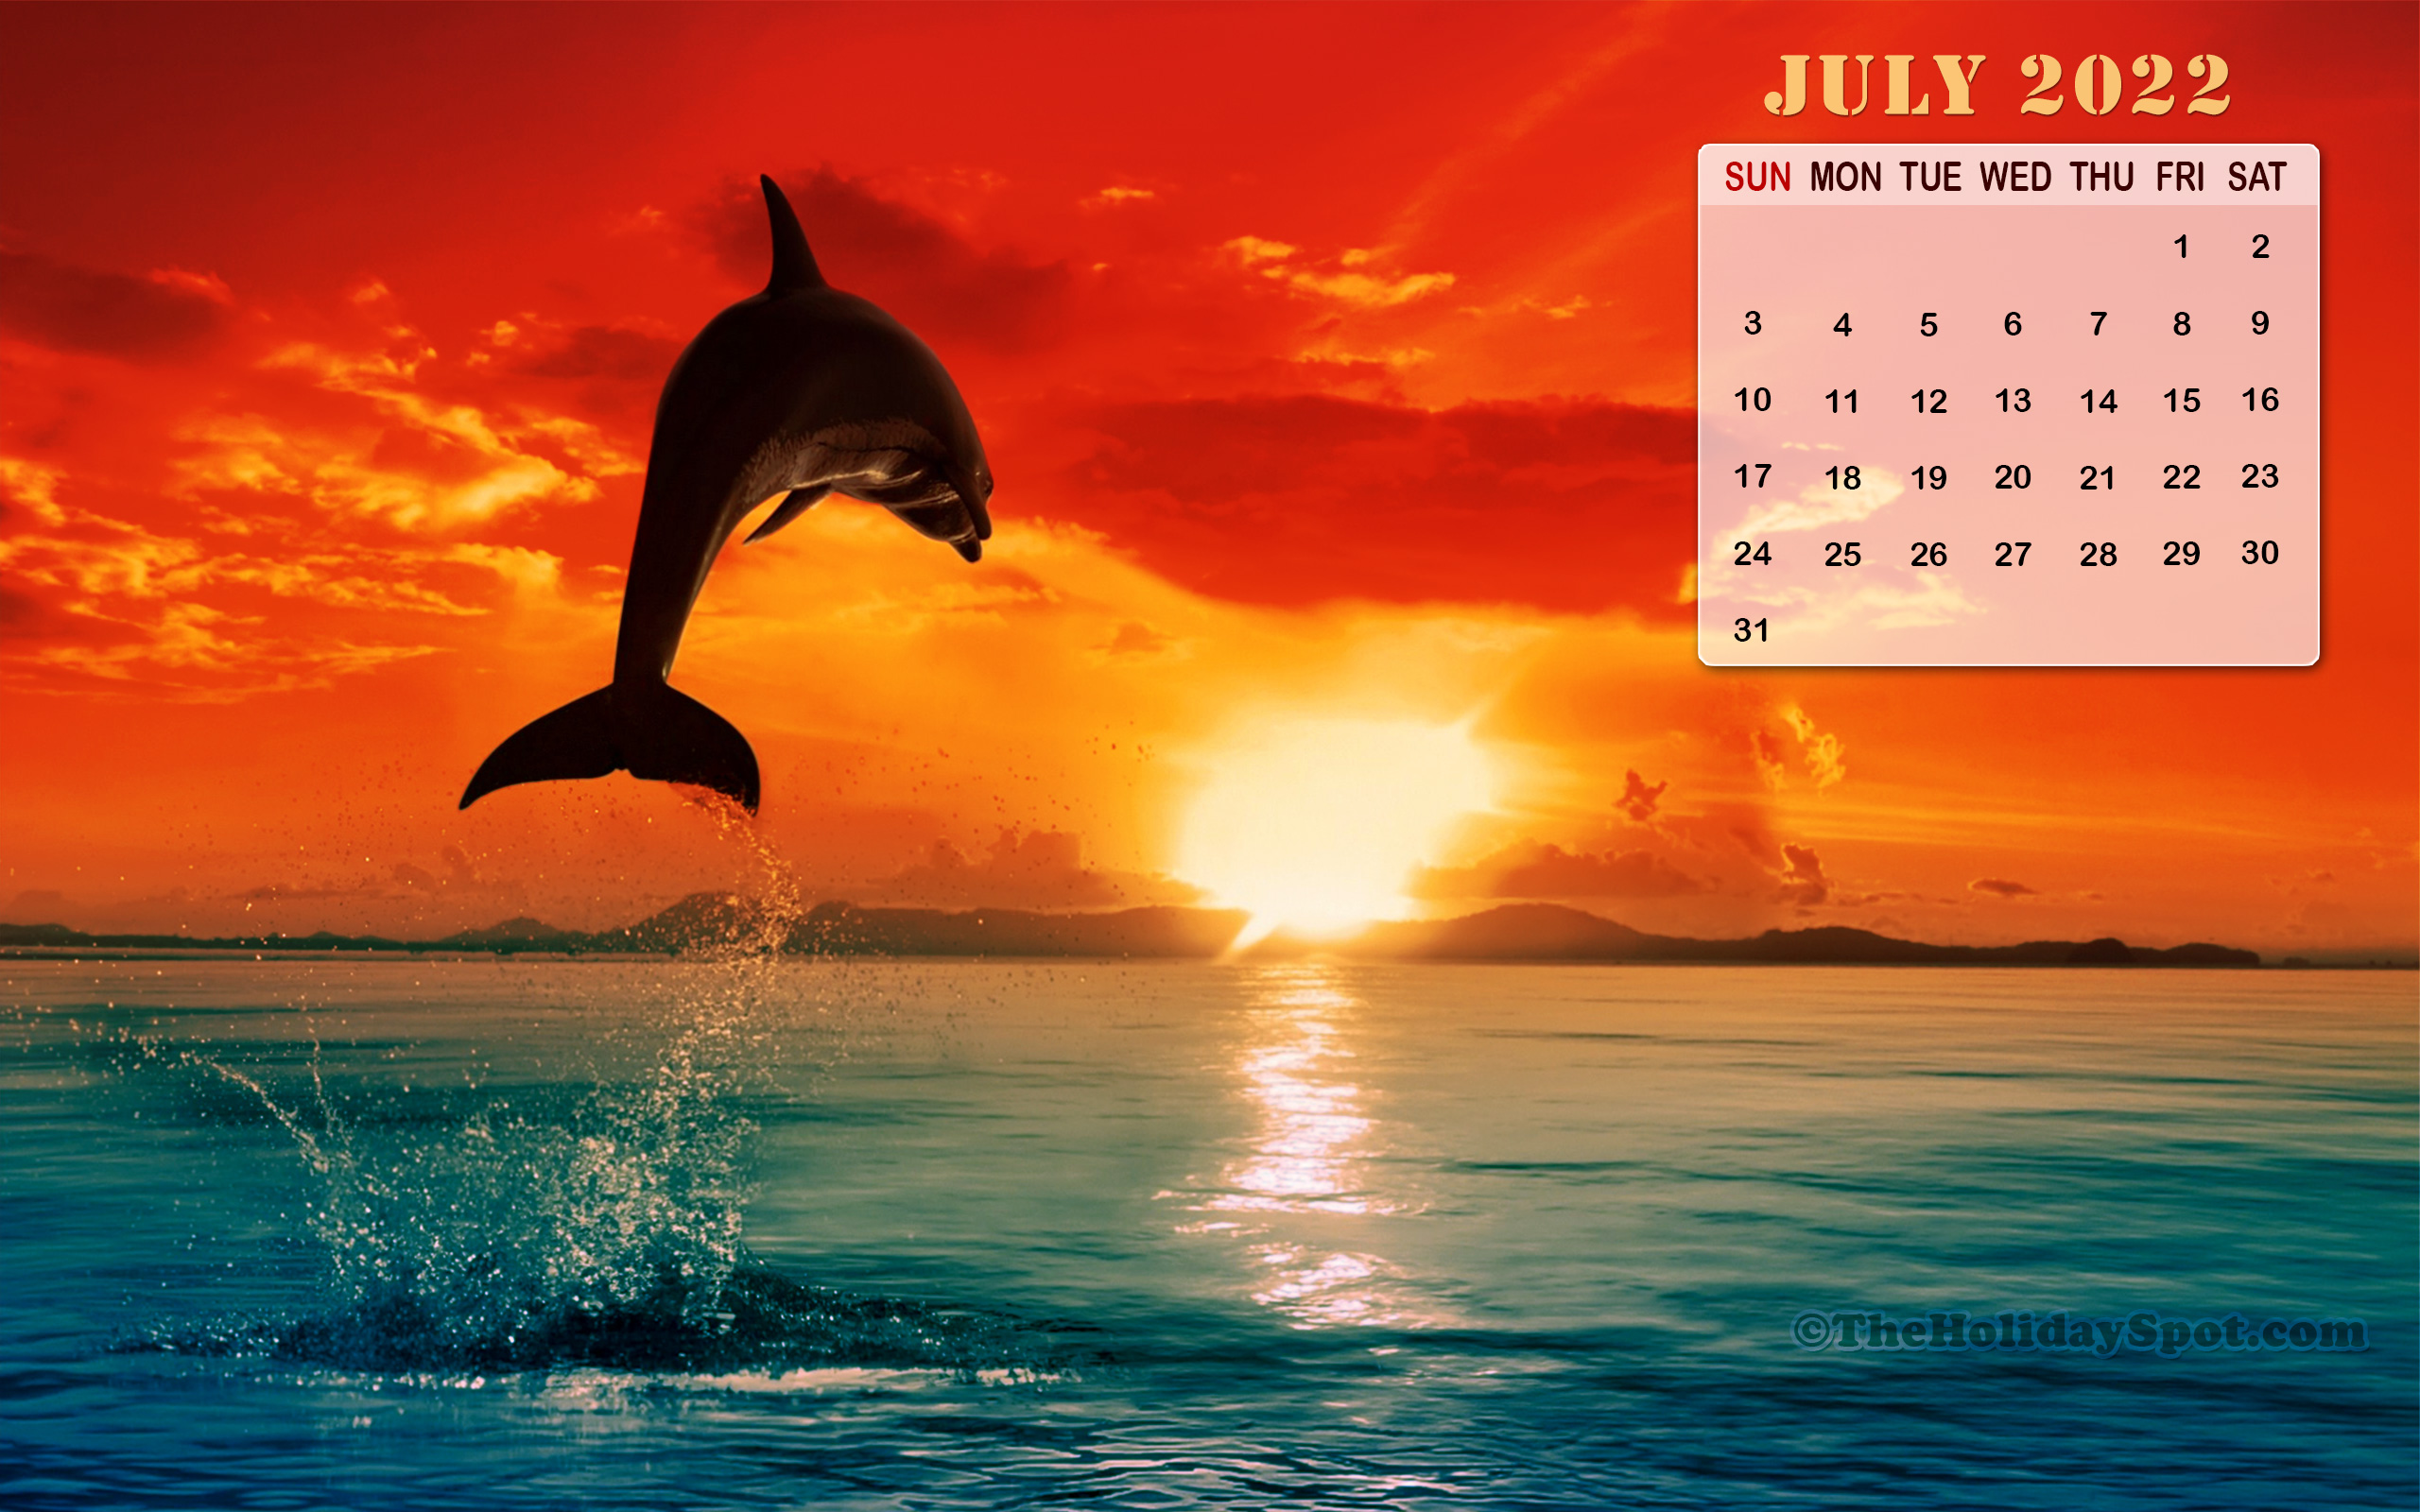 Month wise Calendar Wallpapers for 2022 1080p HD Calendar Wallpapers